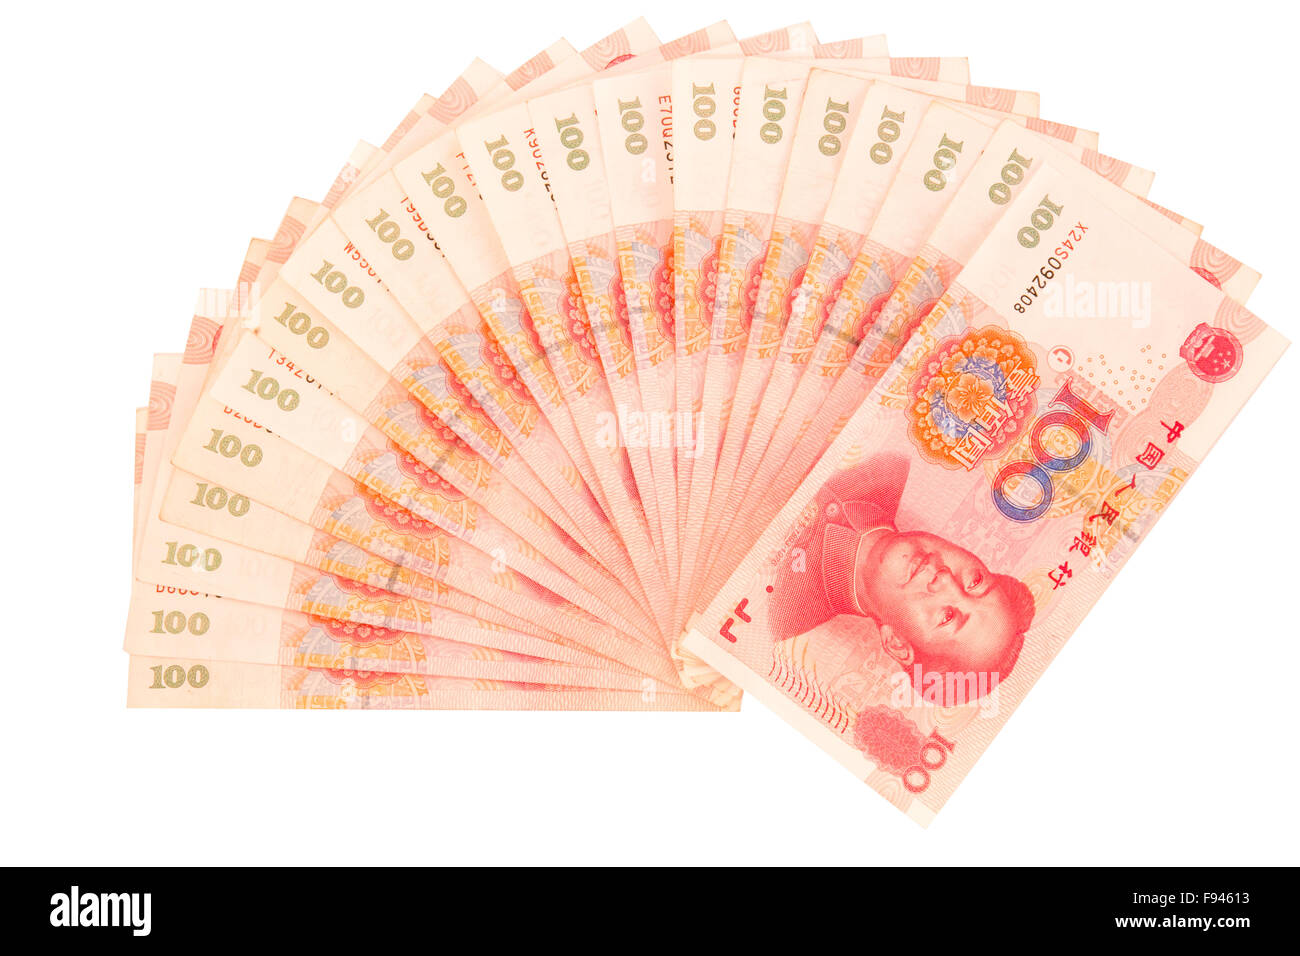 Chinese pile of money with 100 RMB bills Stock Photo